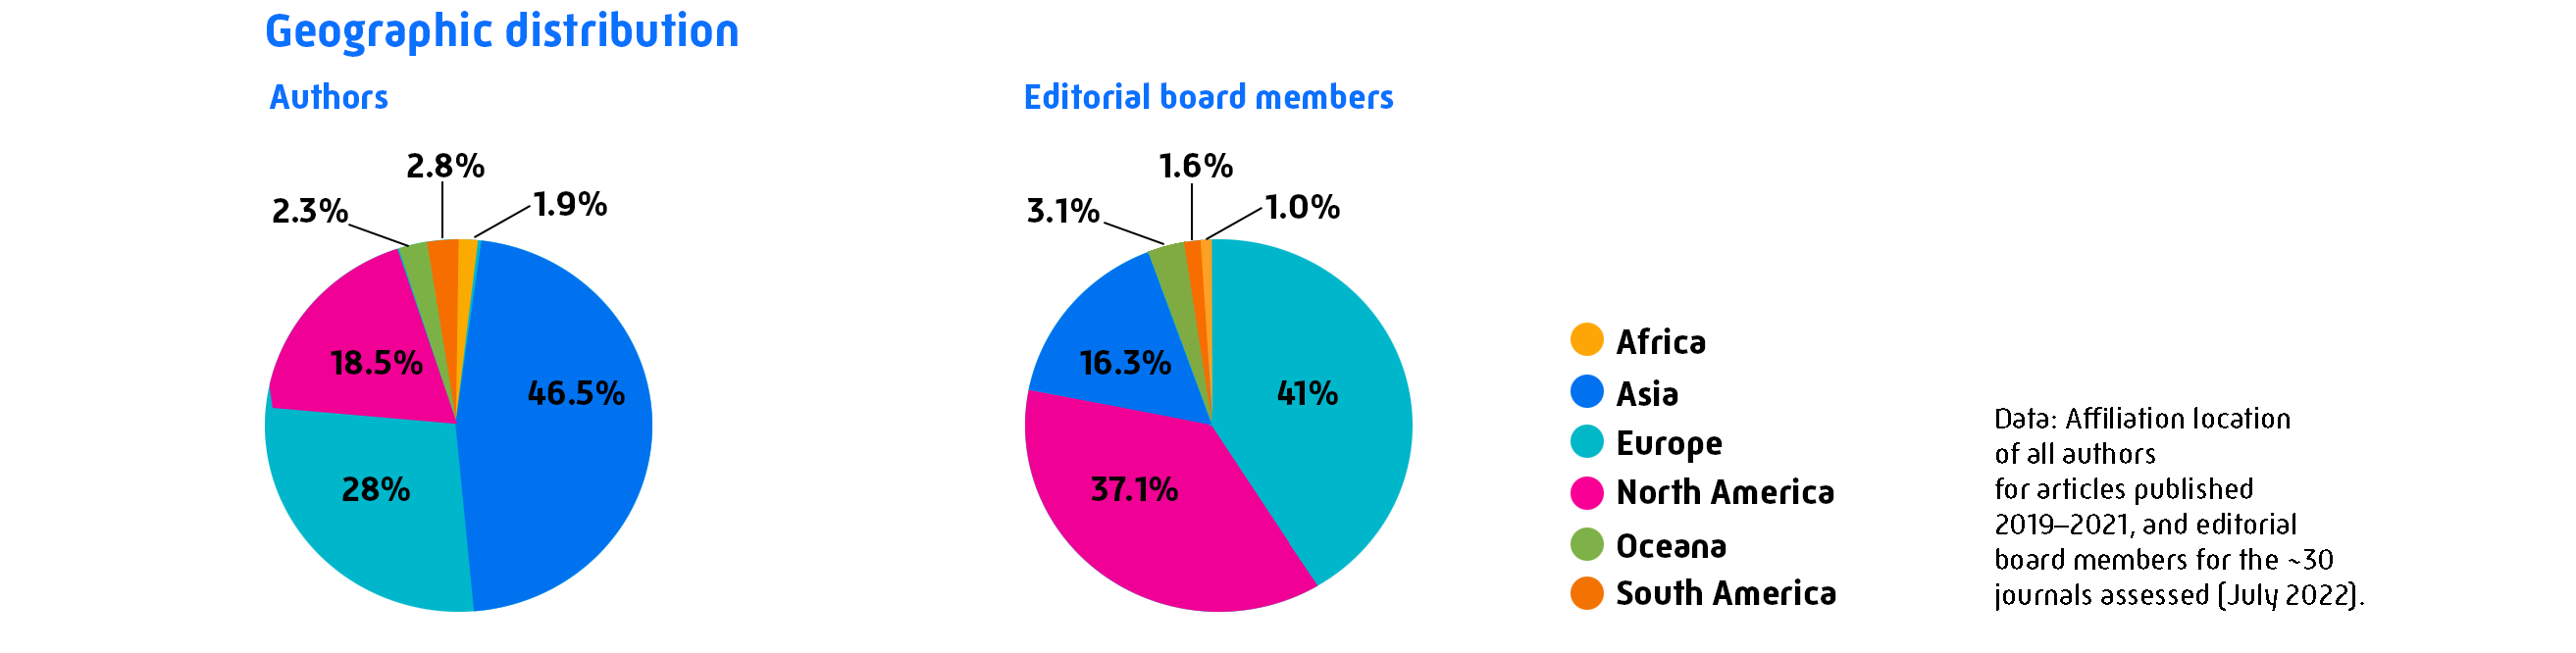 Geographical Distribution of Authors and Editorial Board Members